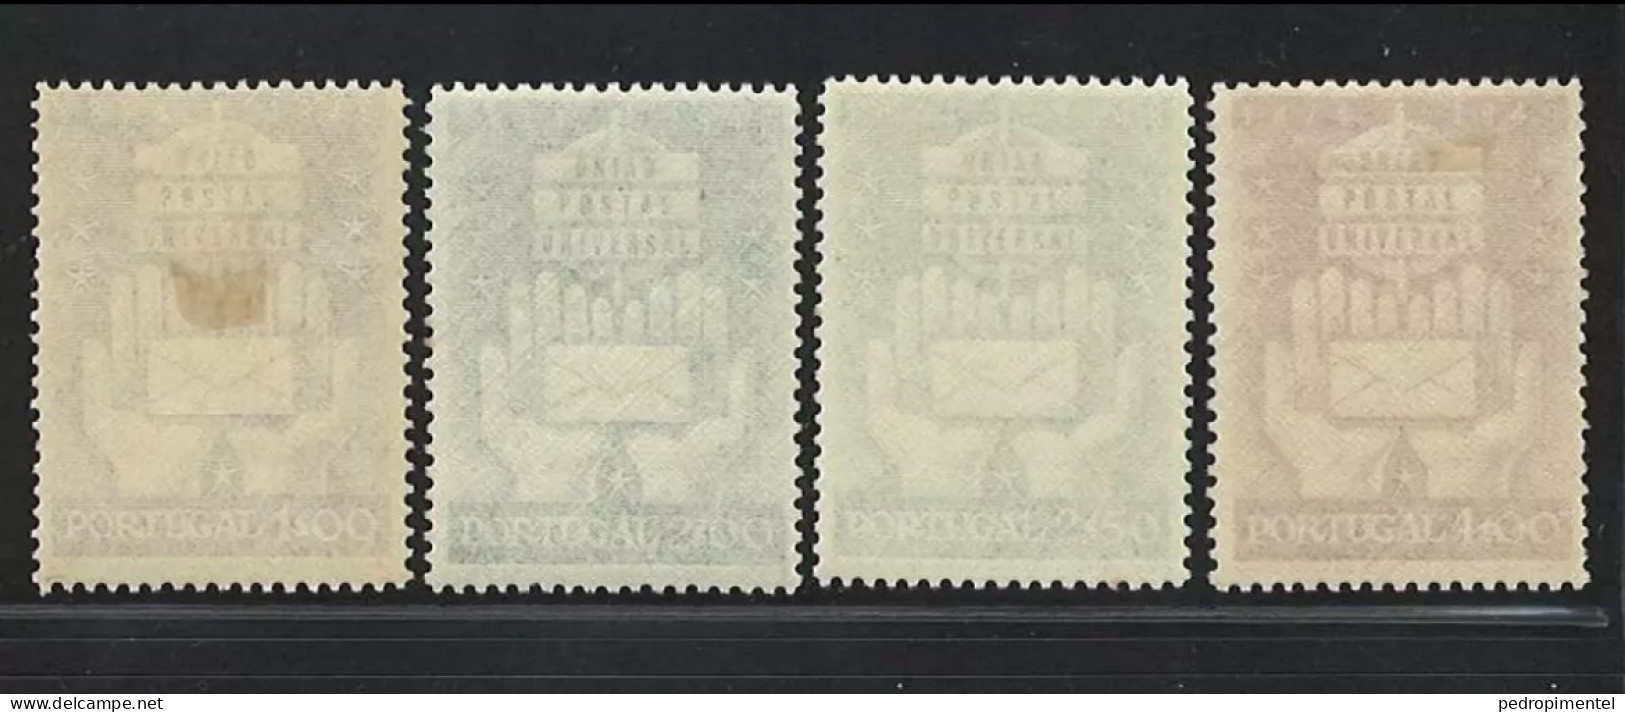 Portugal Stamps 1949 "UIP" Condition MH OG #715-718 - Unused Stamps